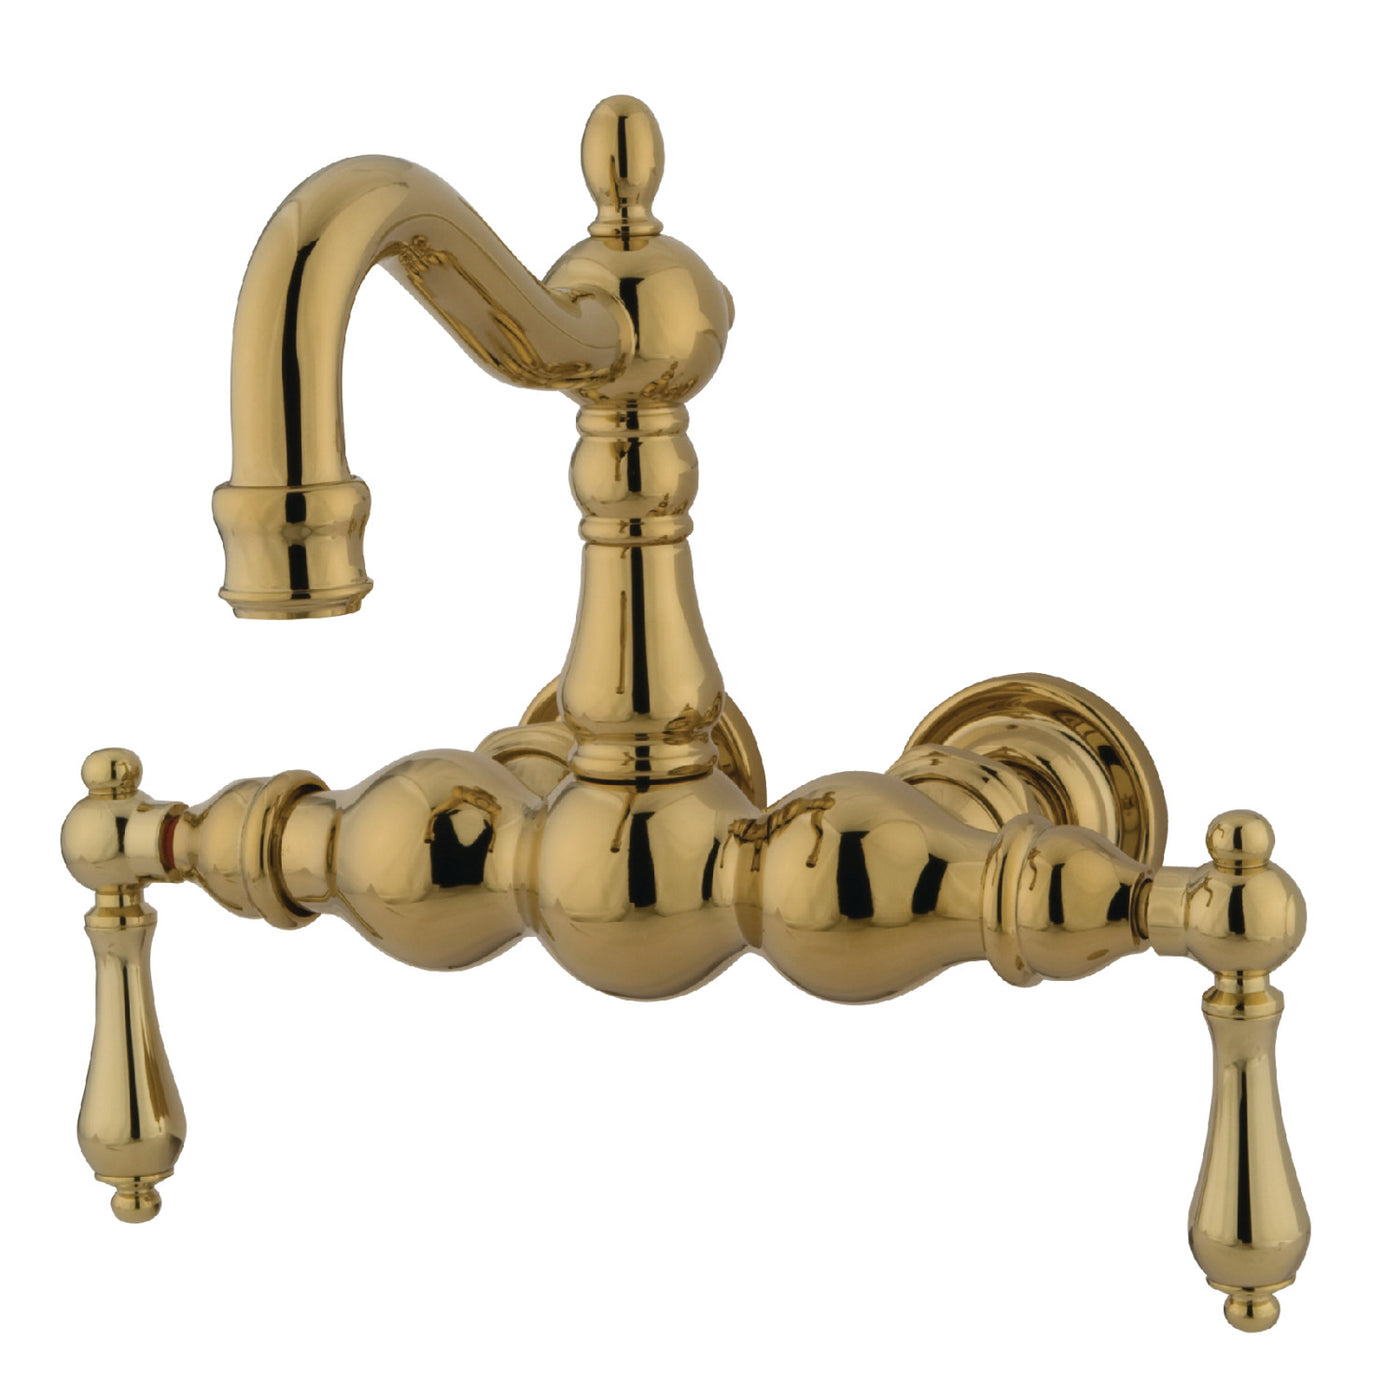 Elements of Design DT10012AL 3-3/8-Inch Wall Mount Tub Faucet, Polished Brass